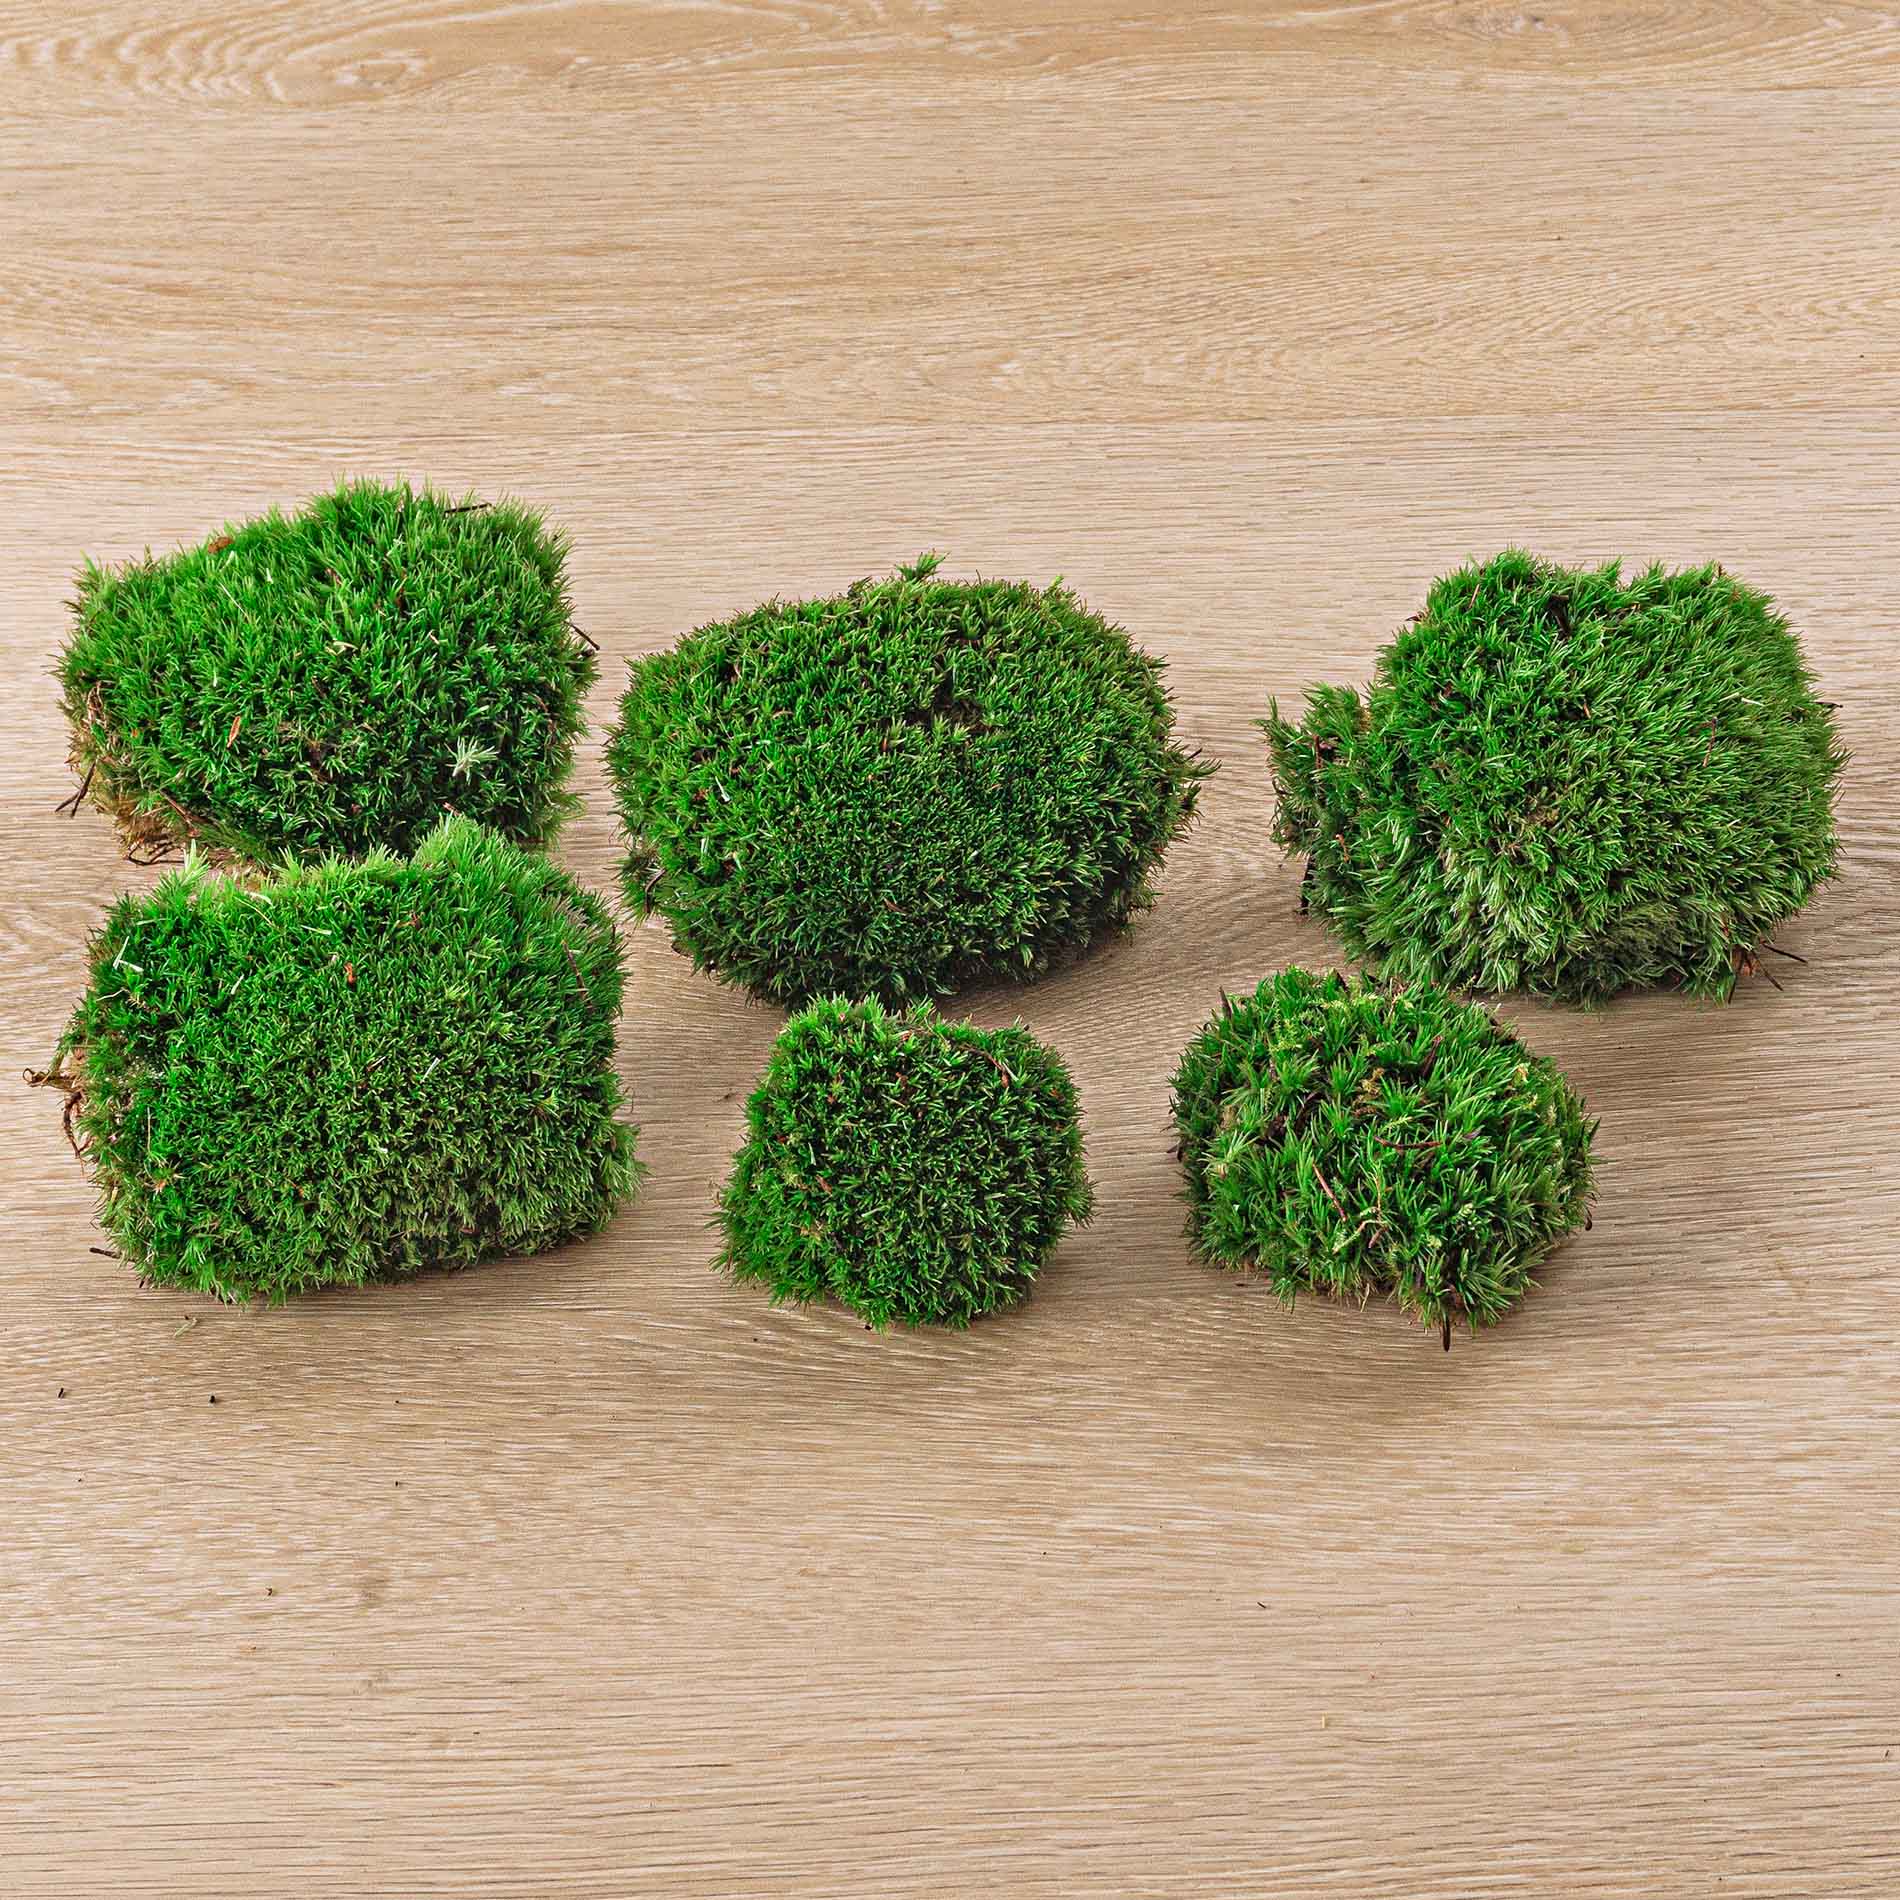 Buy Cushion Moss For Sale Online